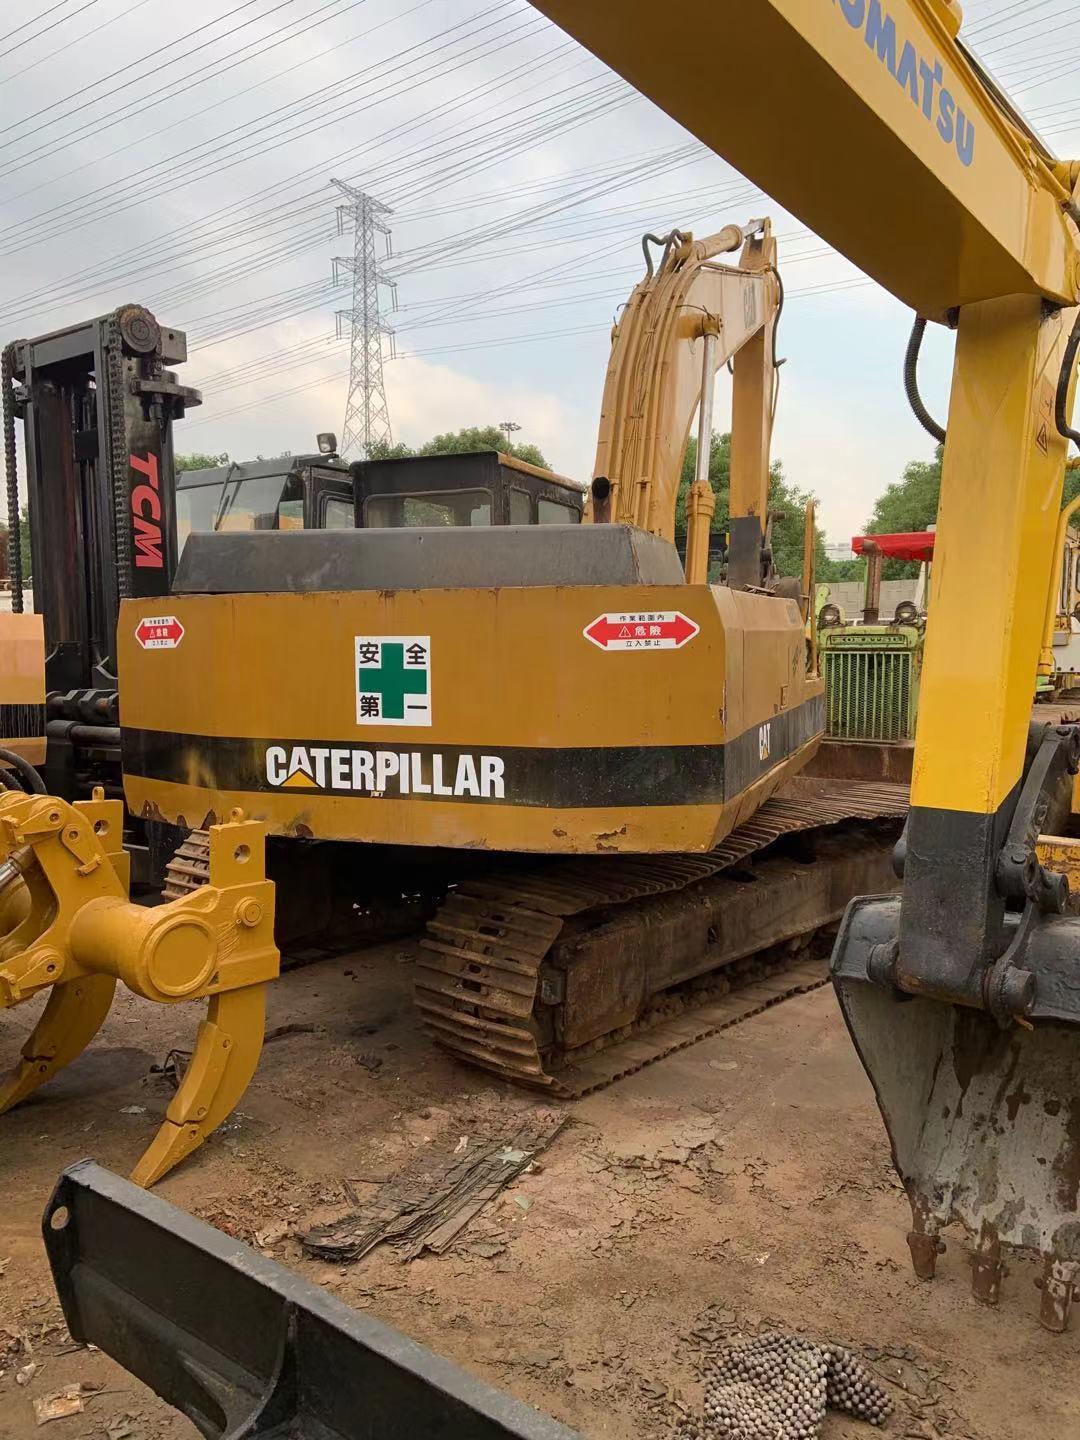 Used/Secondhand Cat E200b Excavator with Good Condition in Low Price for Hot Sale